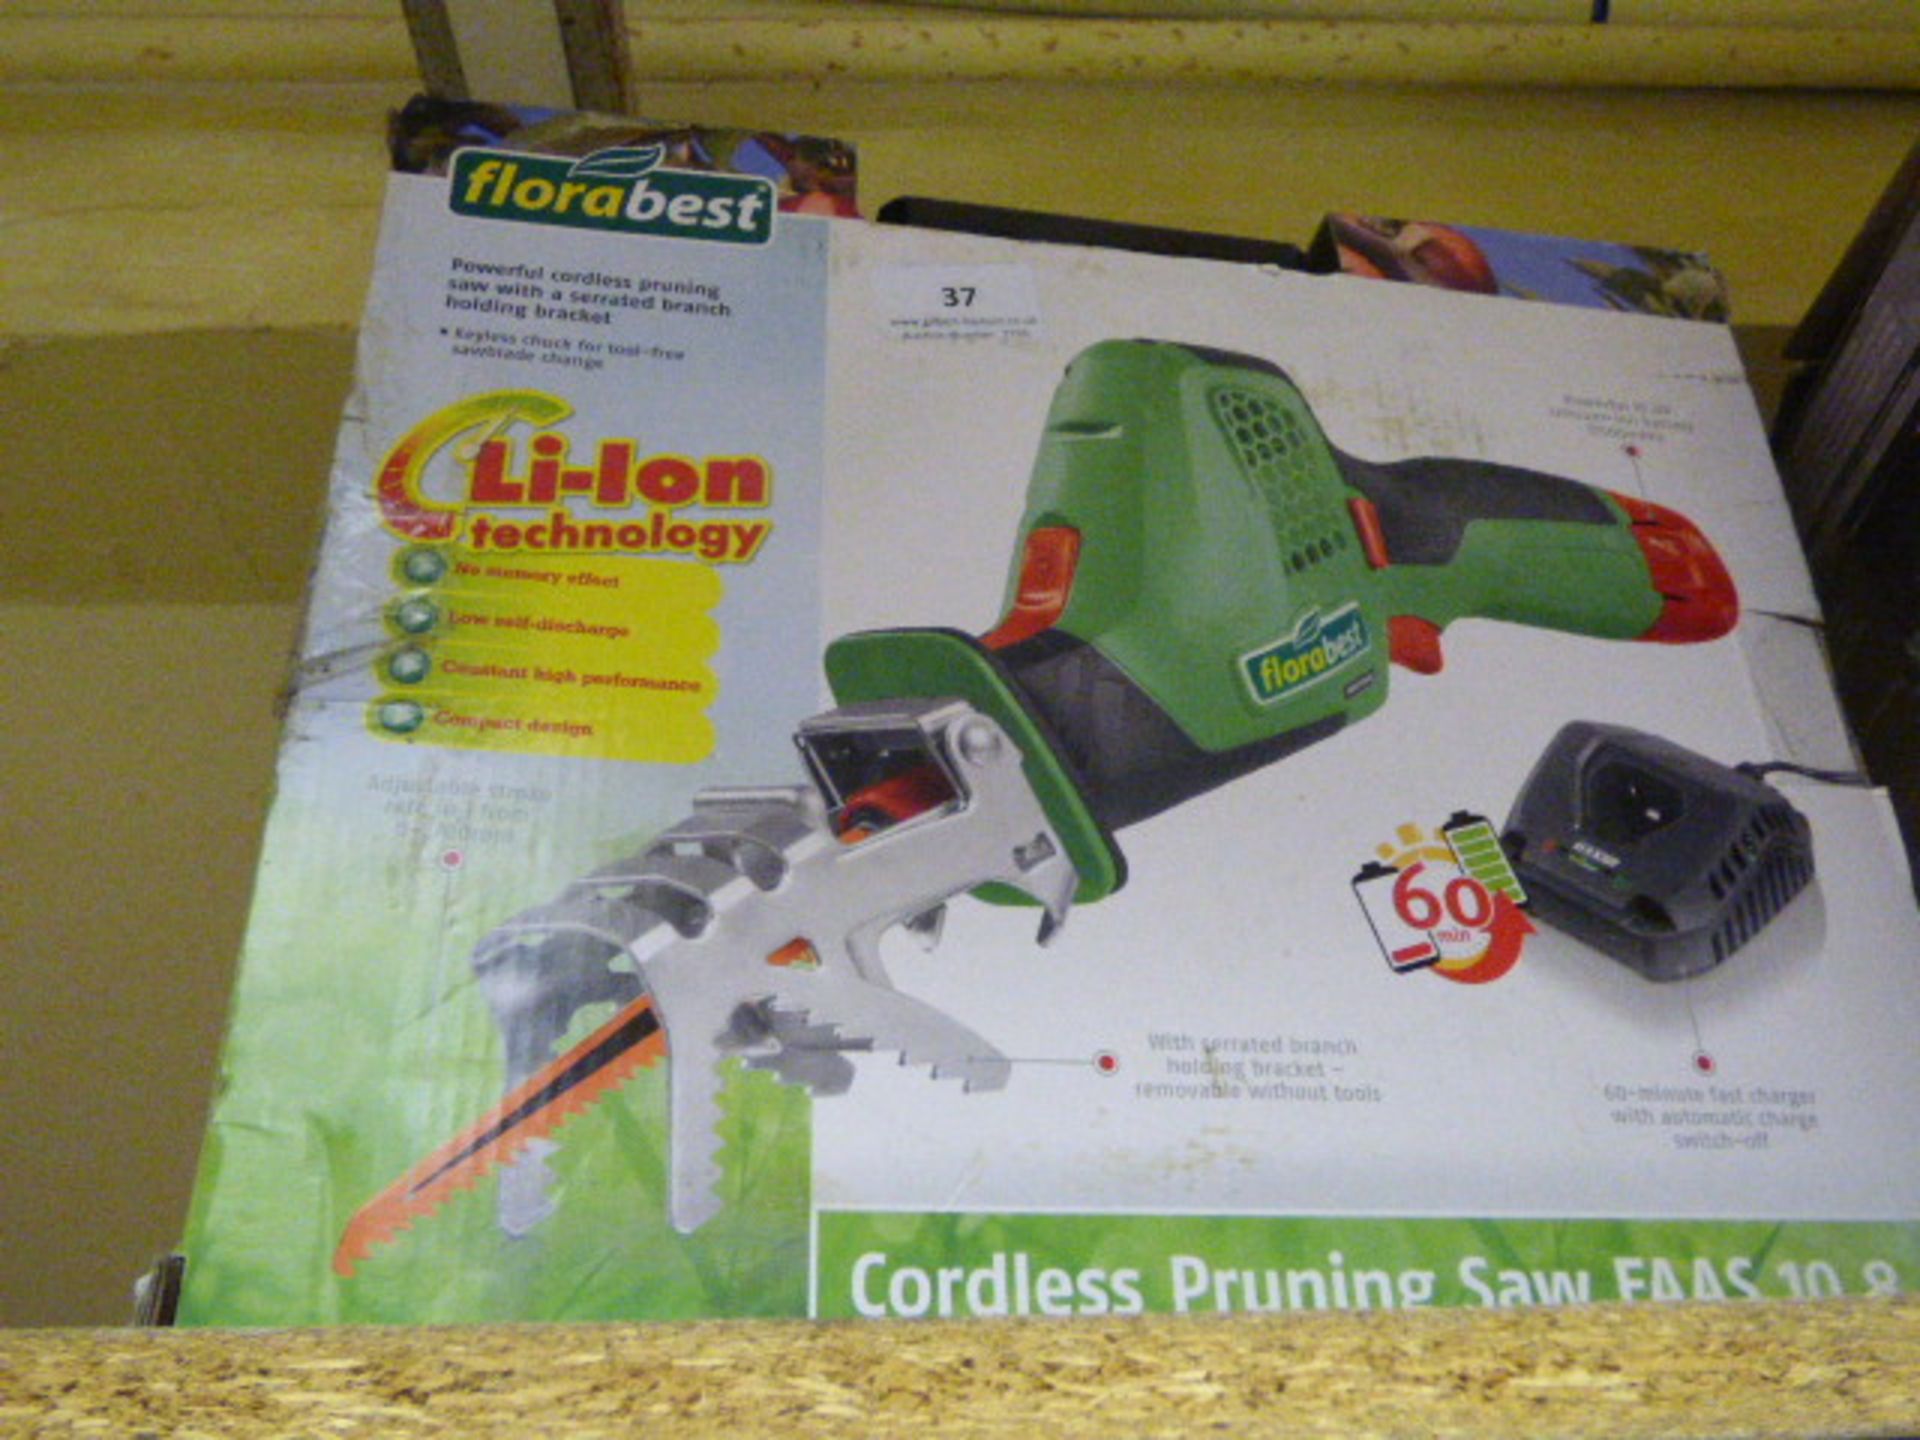 Flora Best Rechargeable Saw